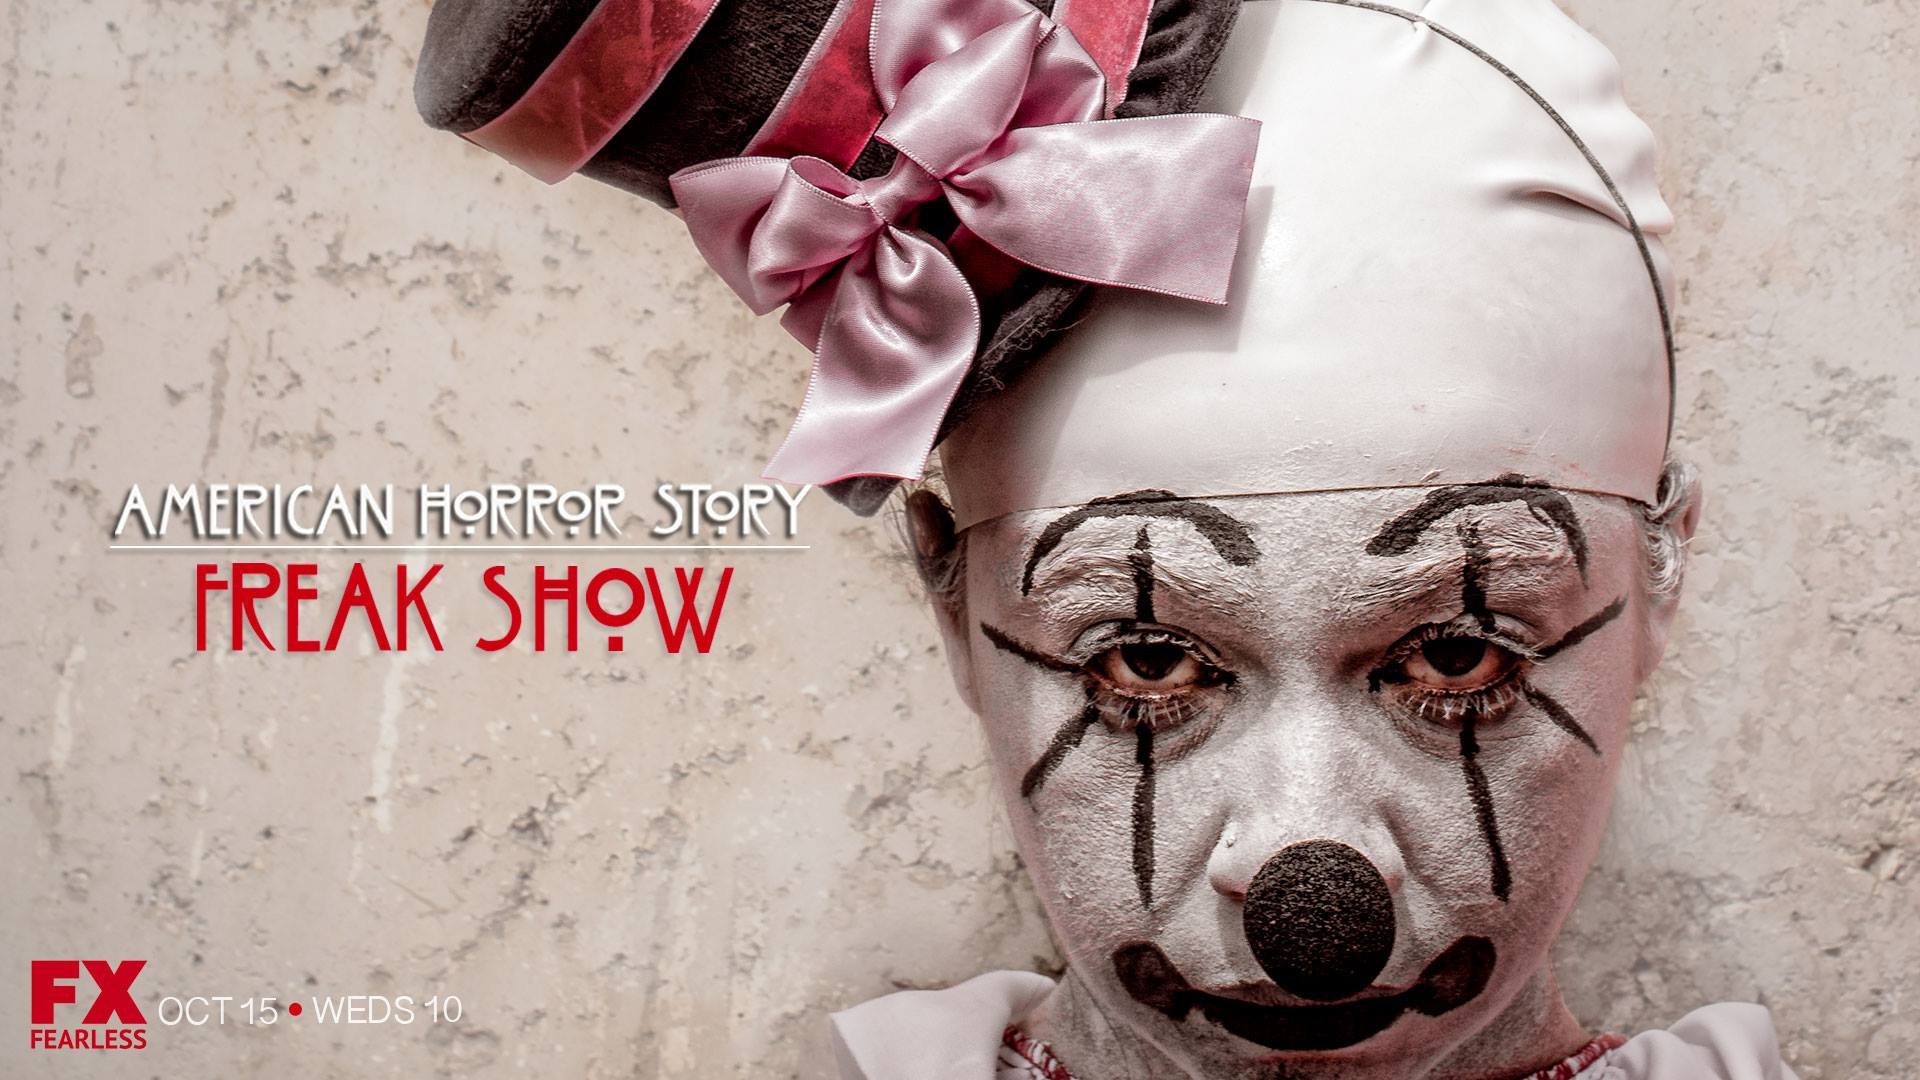 These Creepy Fan-Made Teasers for American Horror Story: Freakshow are Giving FX a Run for its Money - The Phoblographer